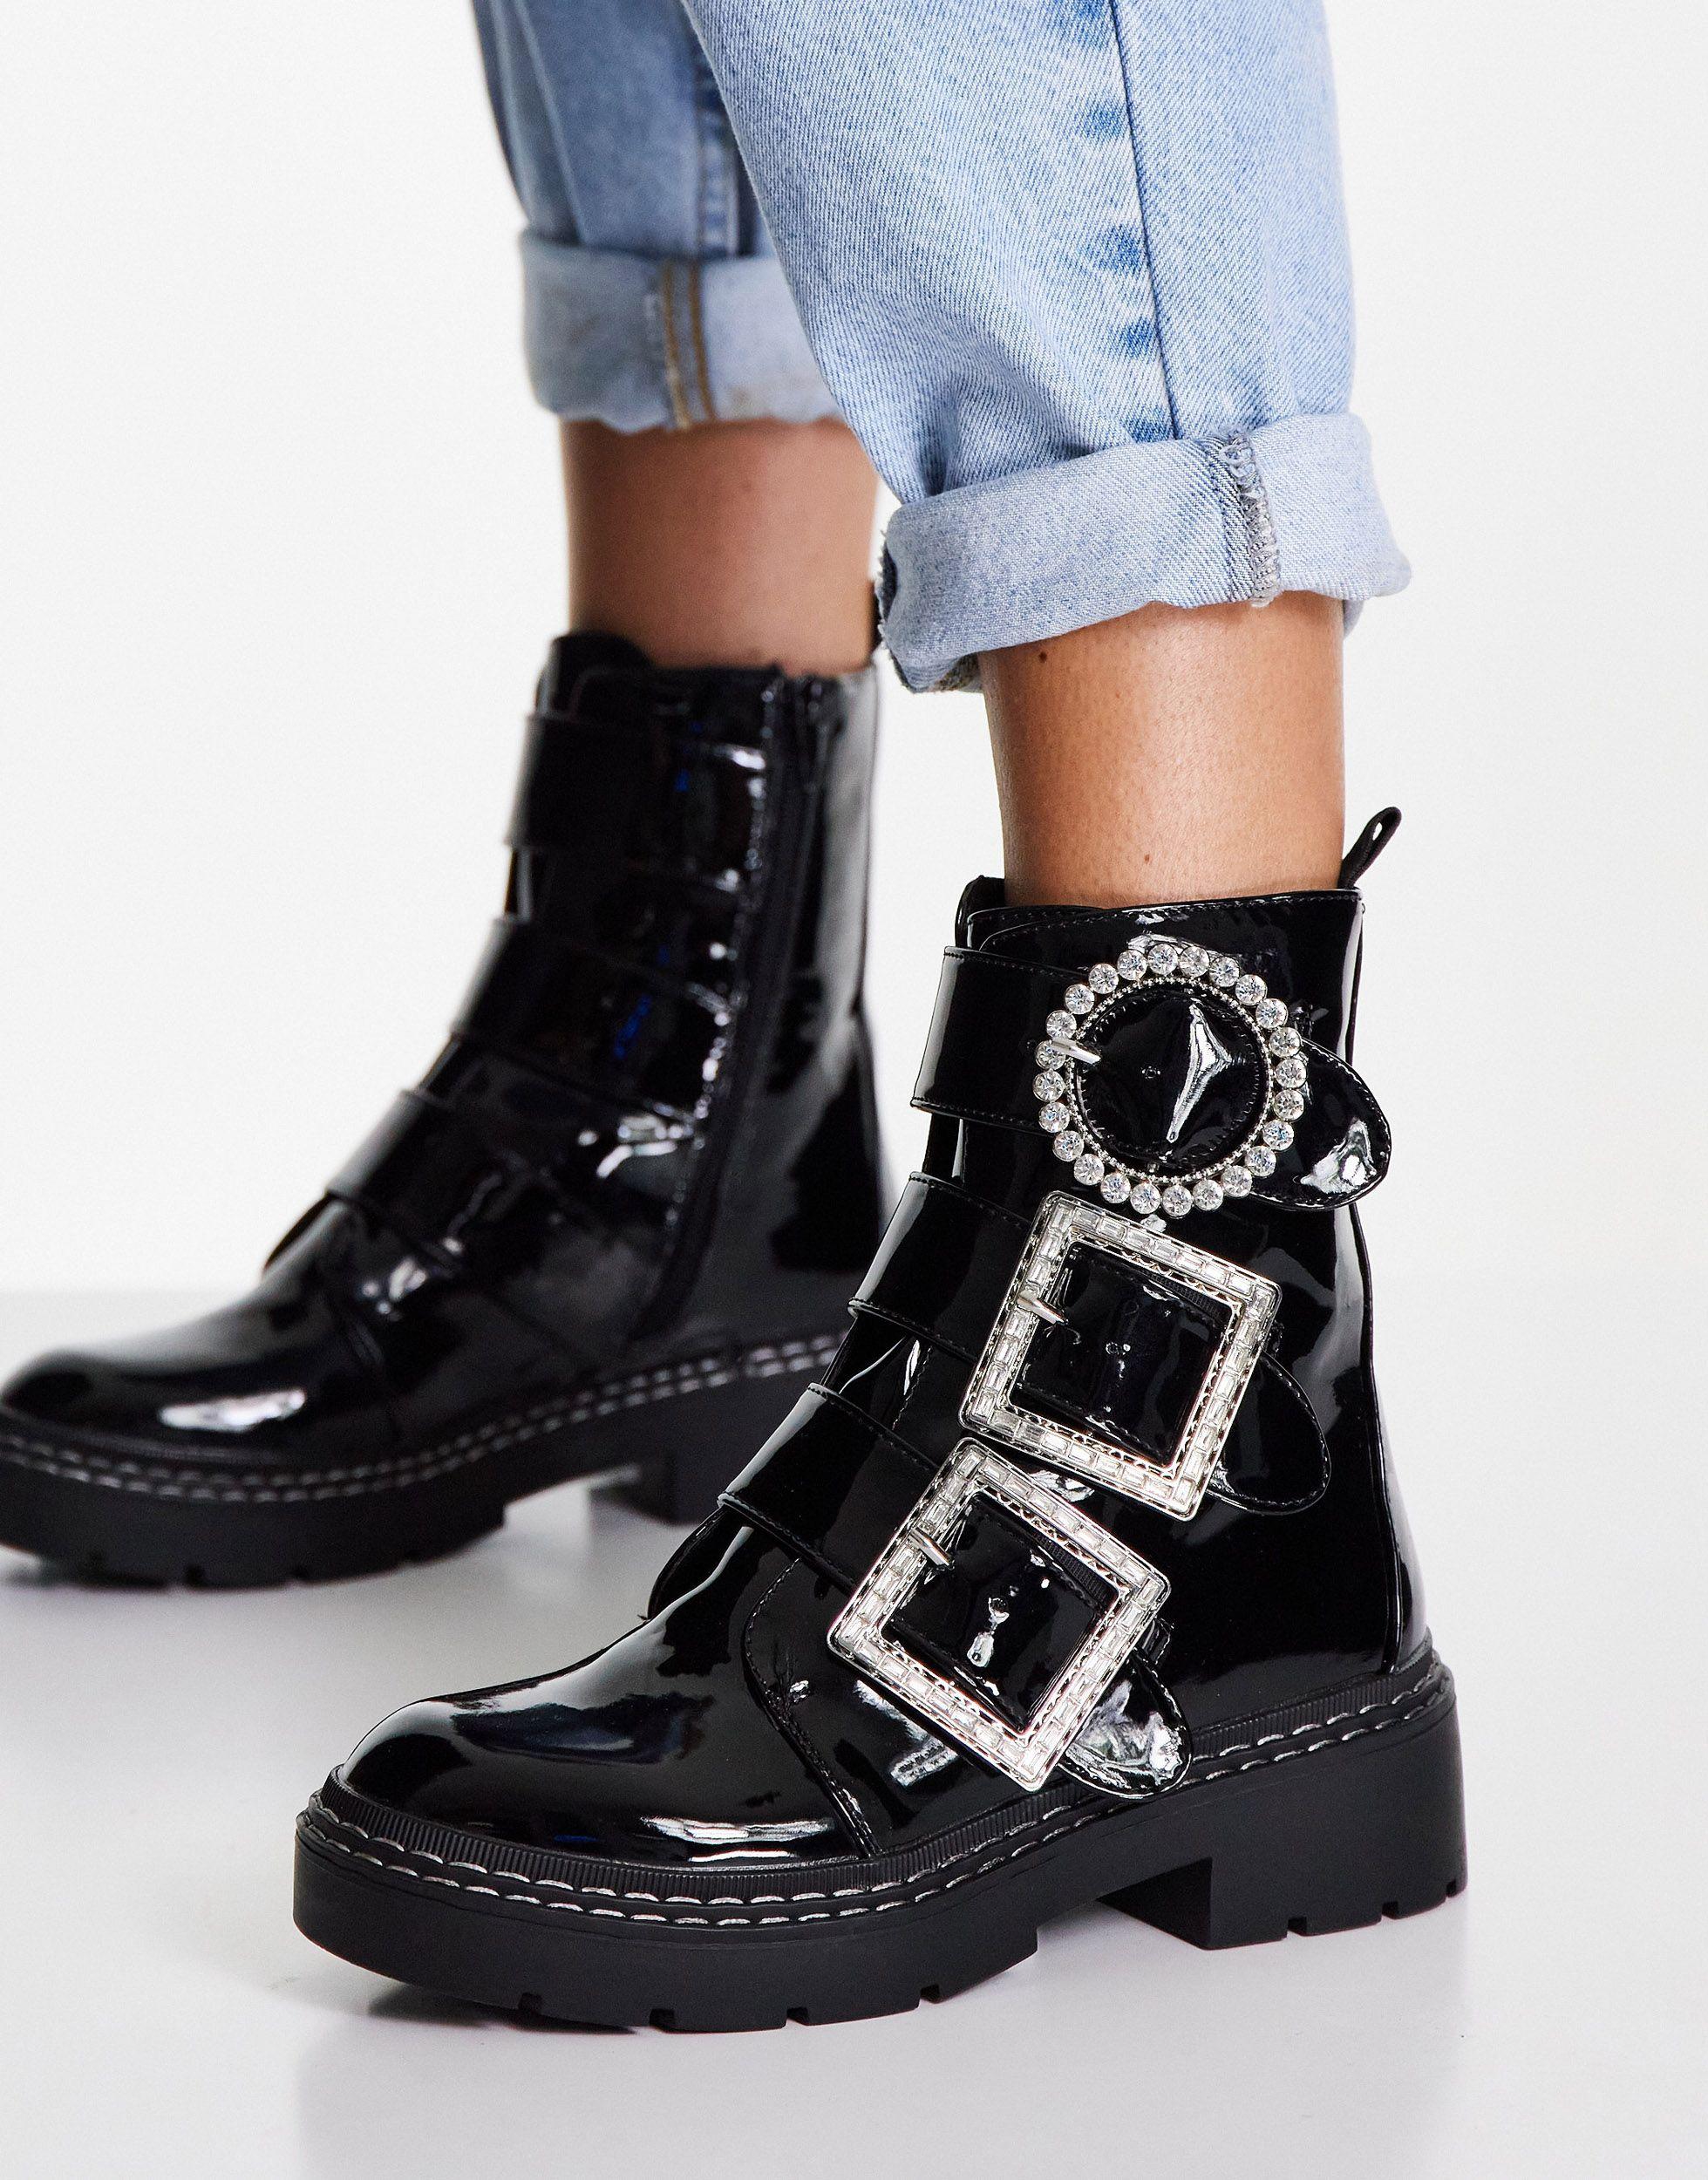 River Island Diamante Buckled Flat Boots in Black | Lyst